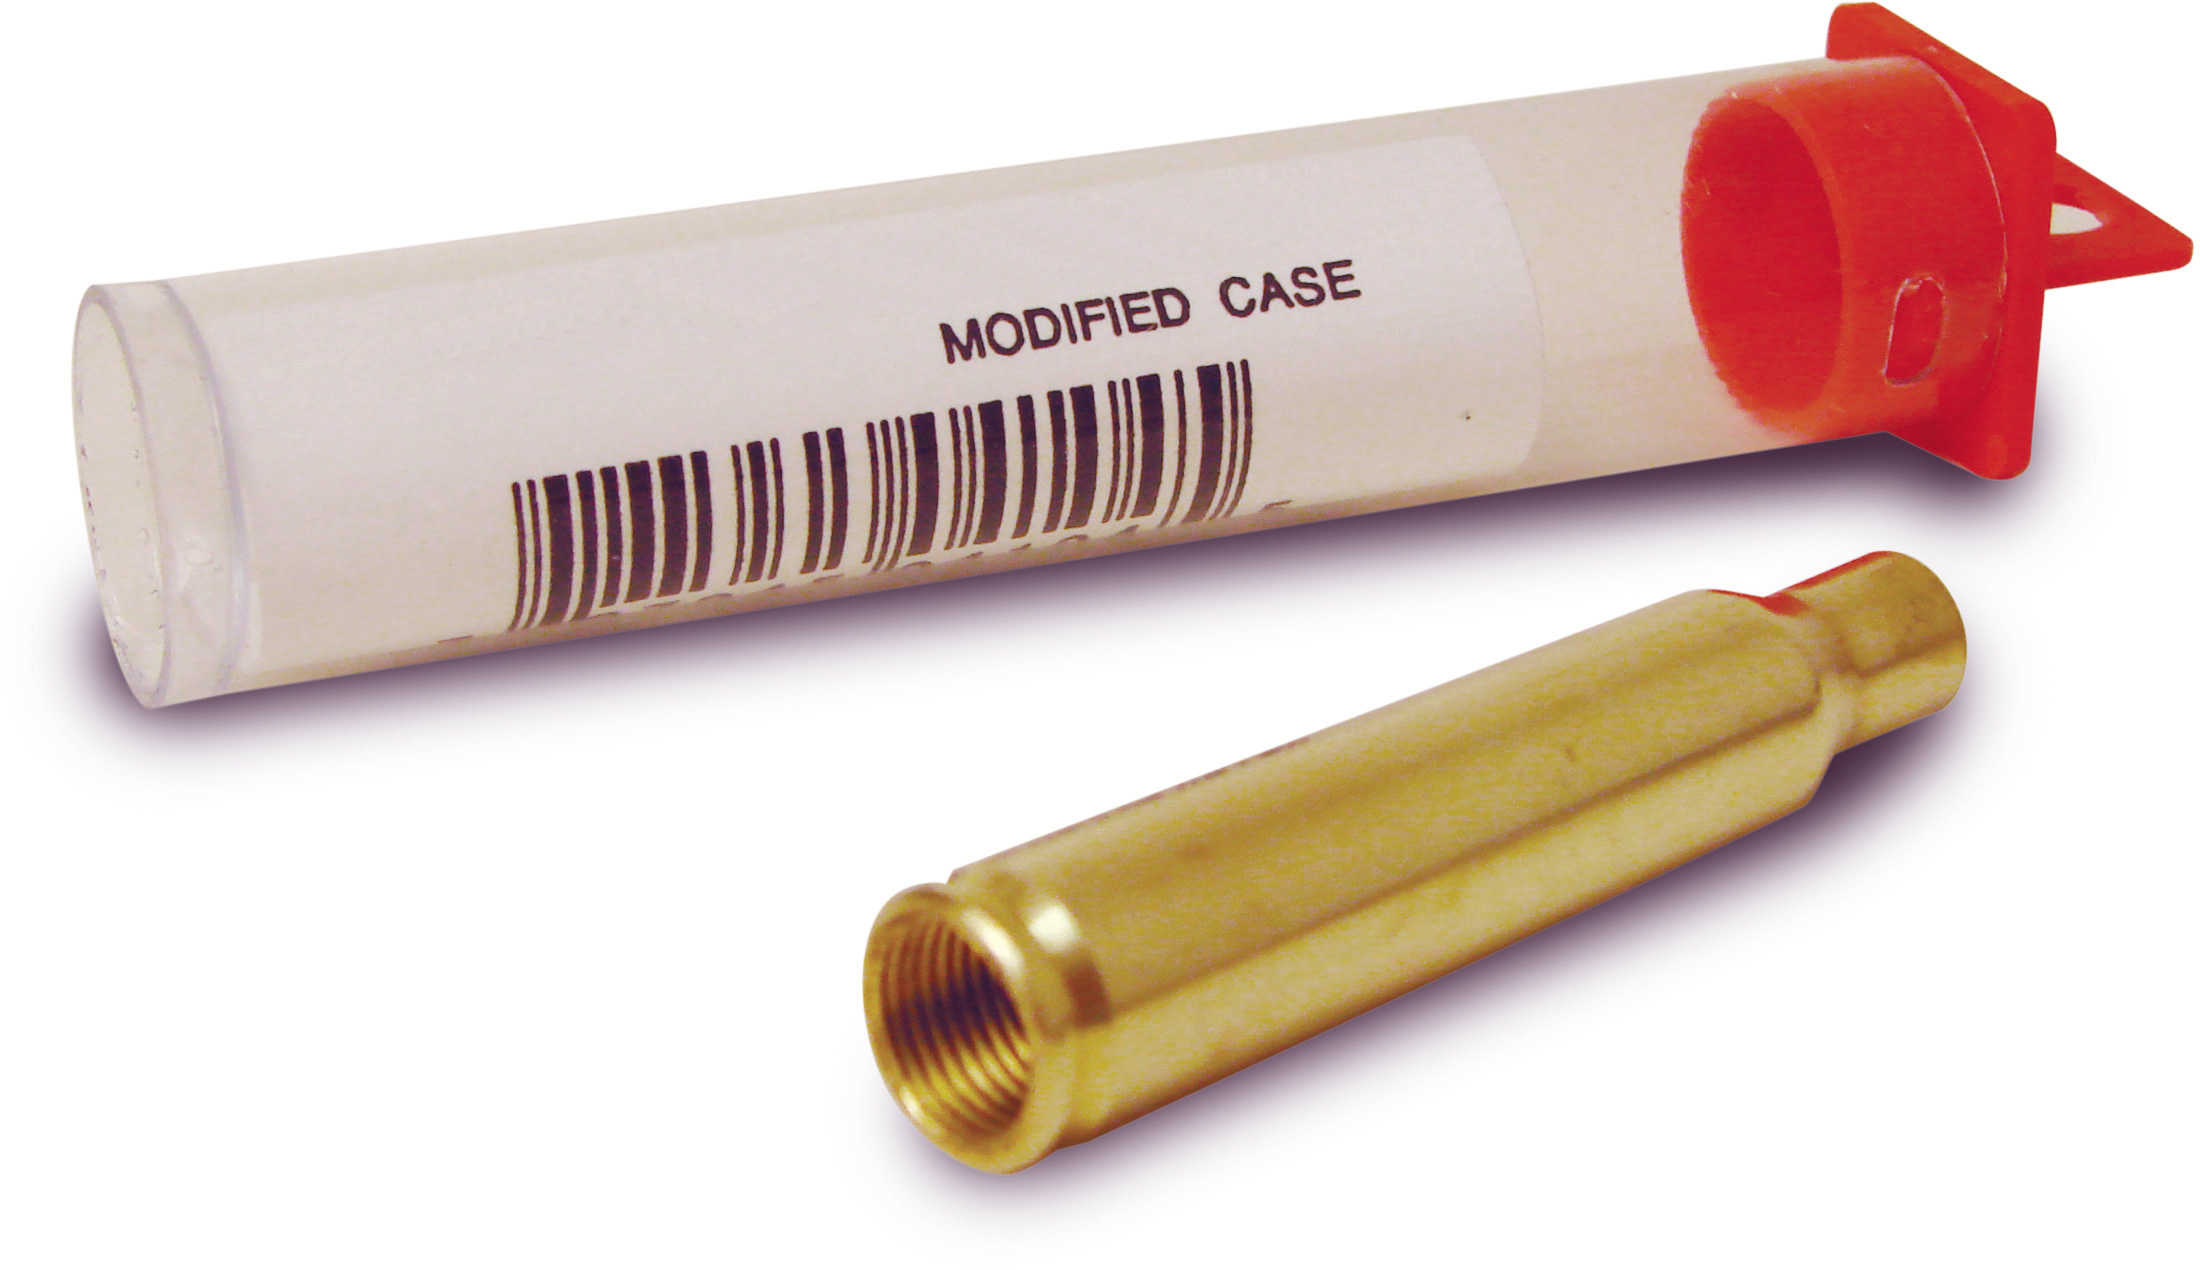 Hornady Lock-N-Load 7.62 x 39 .308-.311 Modified Case 1 Count Md: A762-img-1